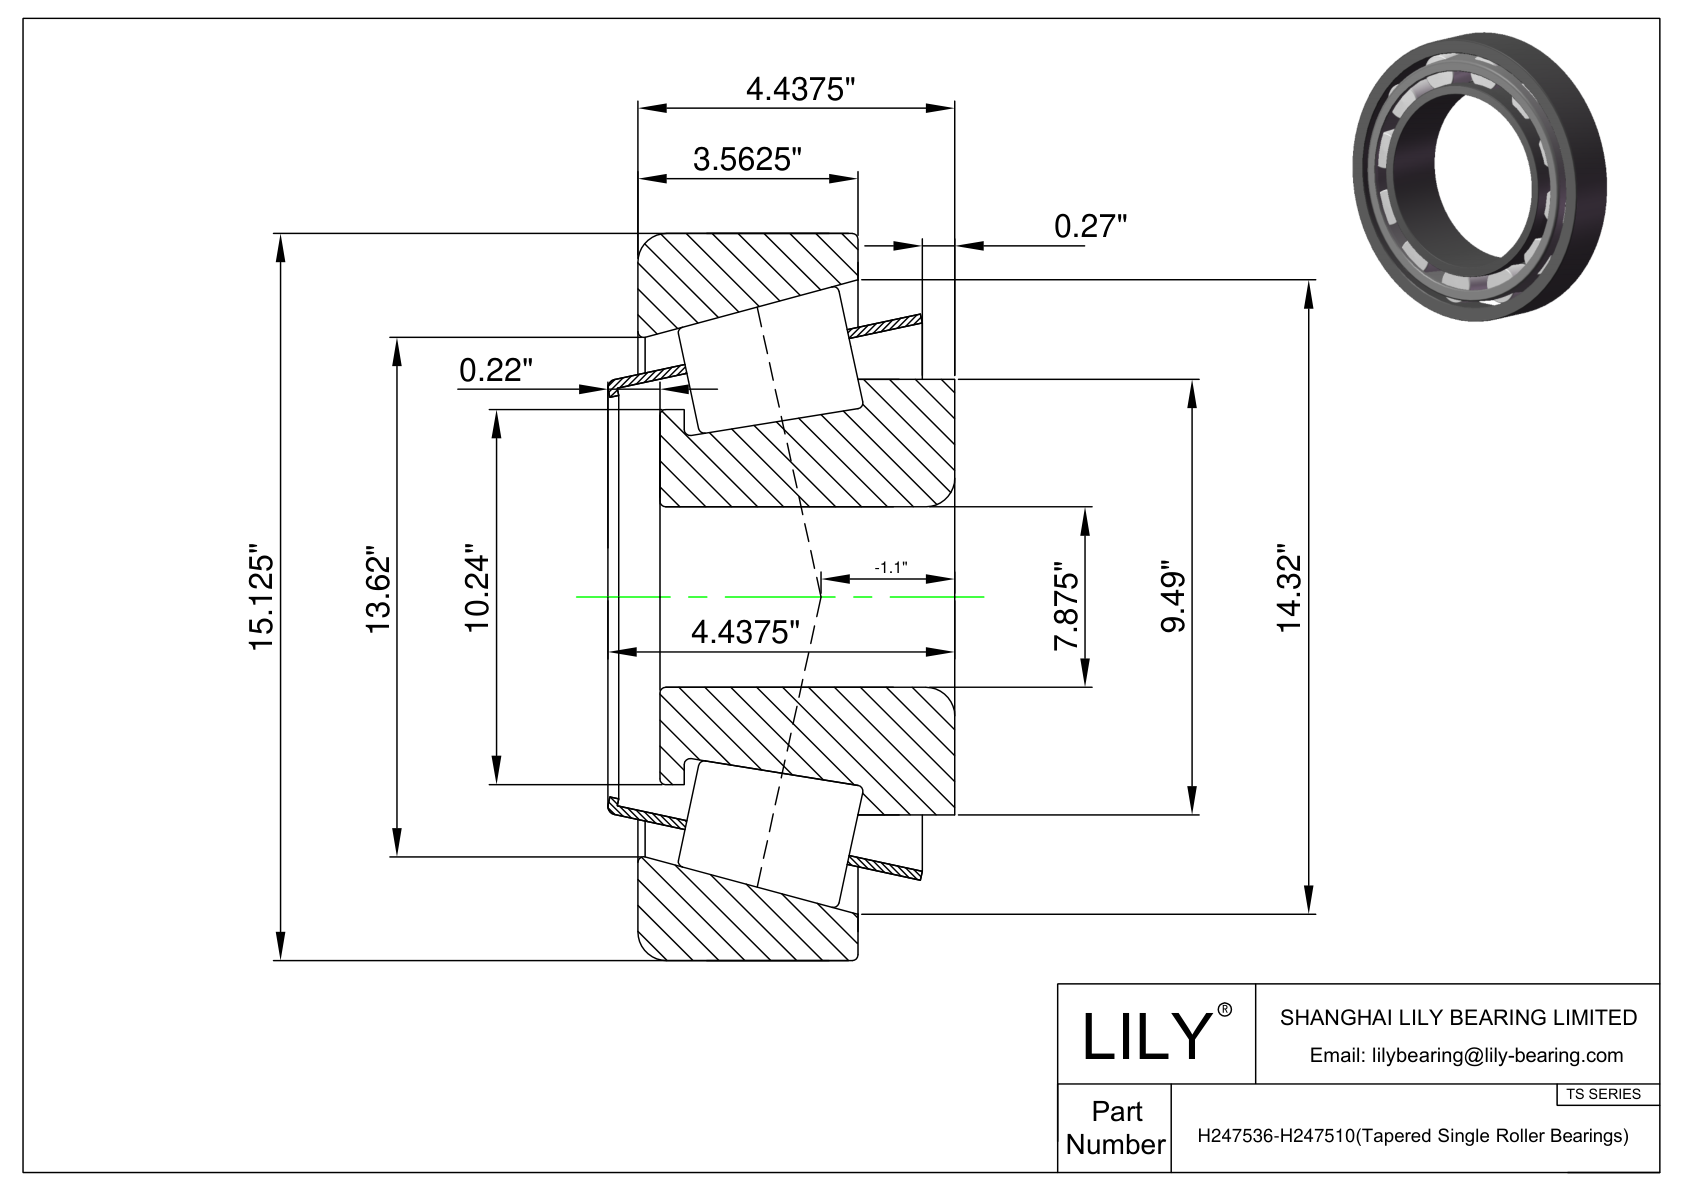 H247536-H247510 TS (Tapered Single Roller Bearings) (Imperial) cad drawing